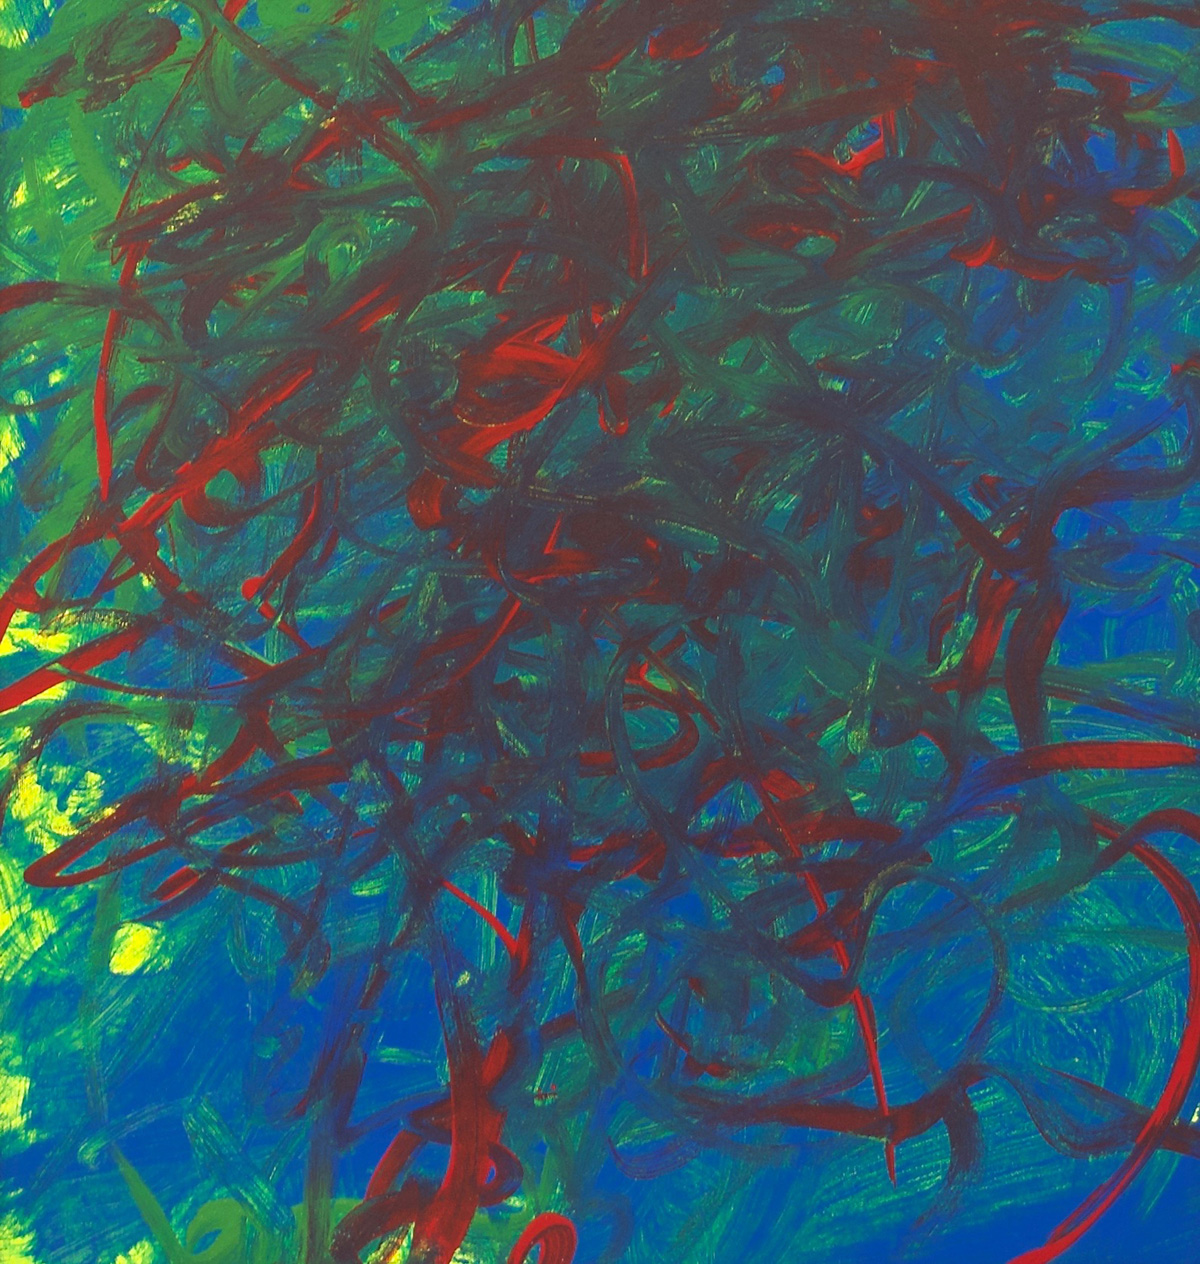 Painting: Deep red thin brushstrokes blended into a green and blue background.